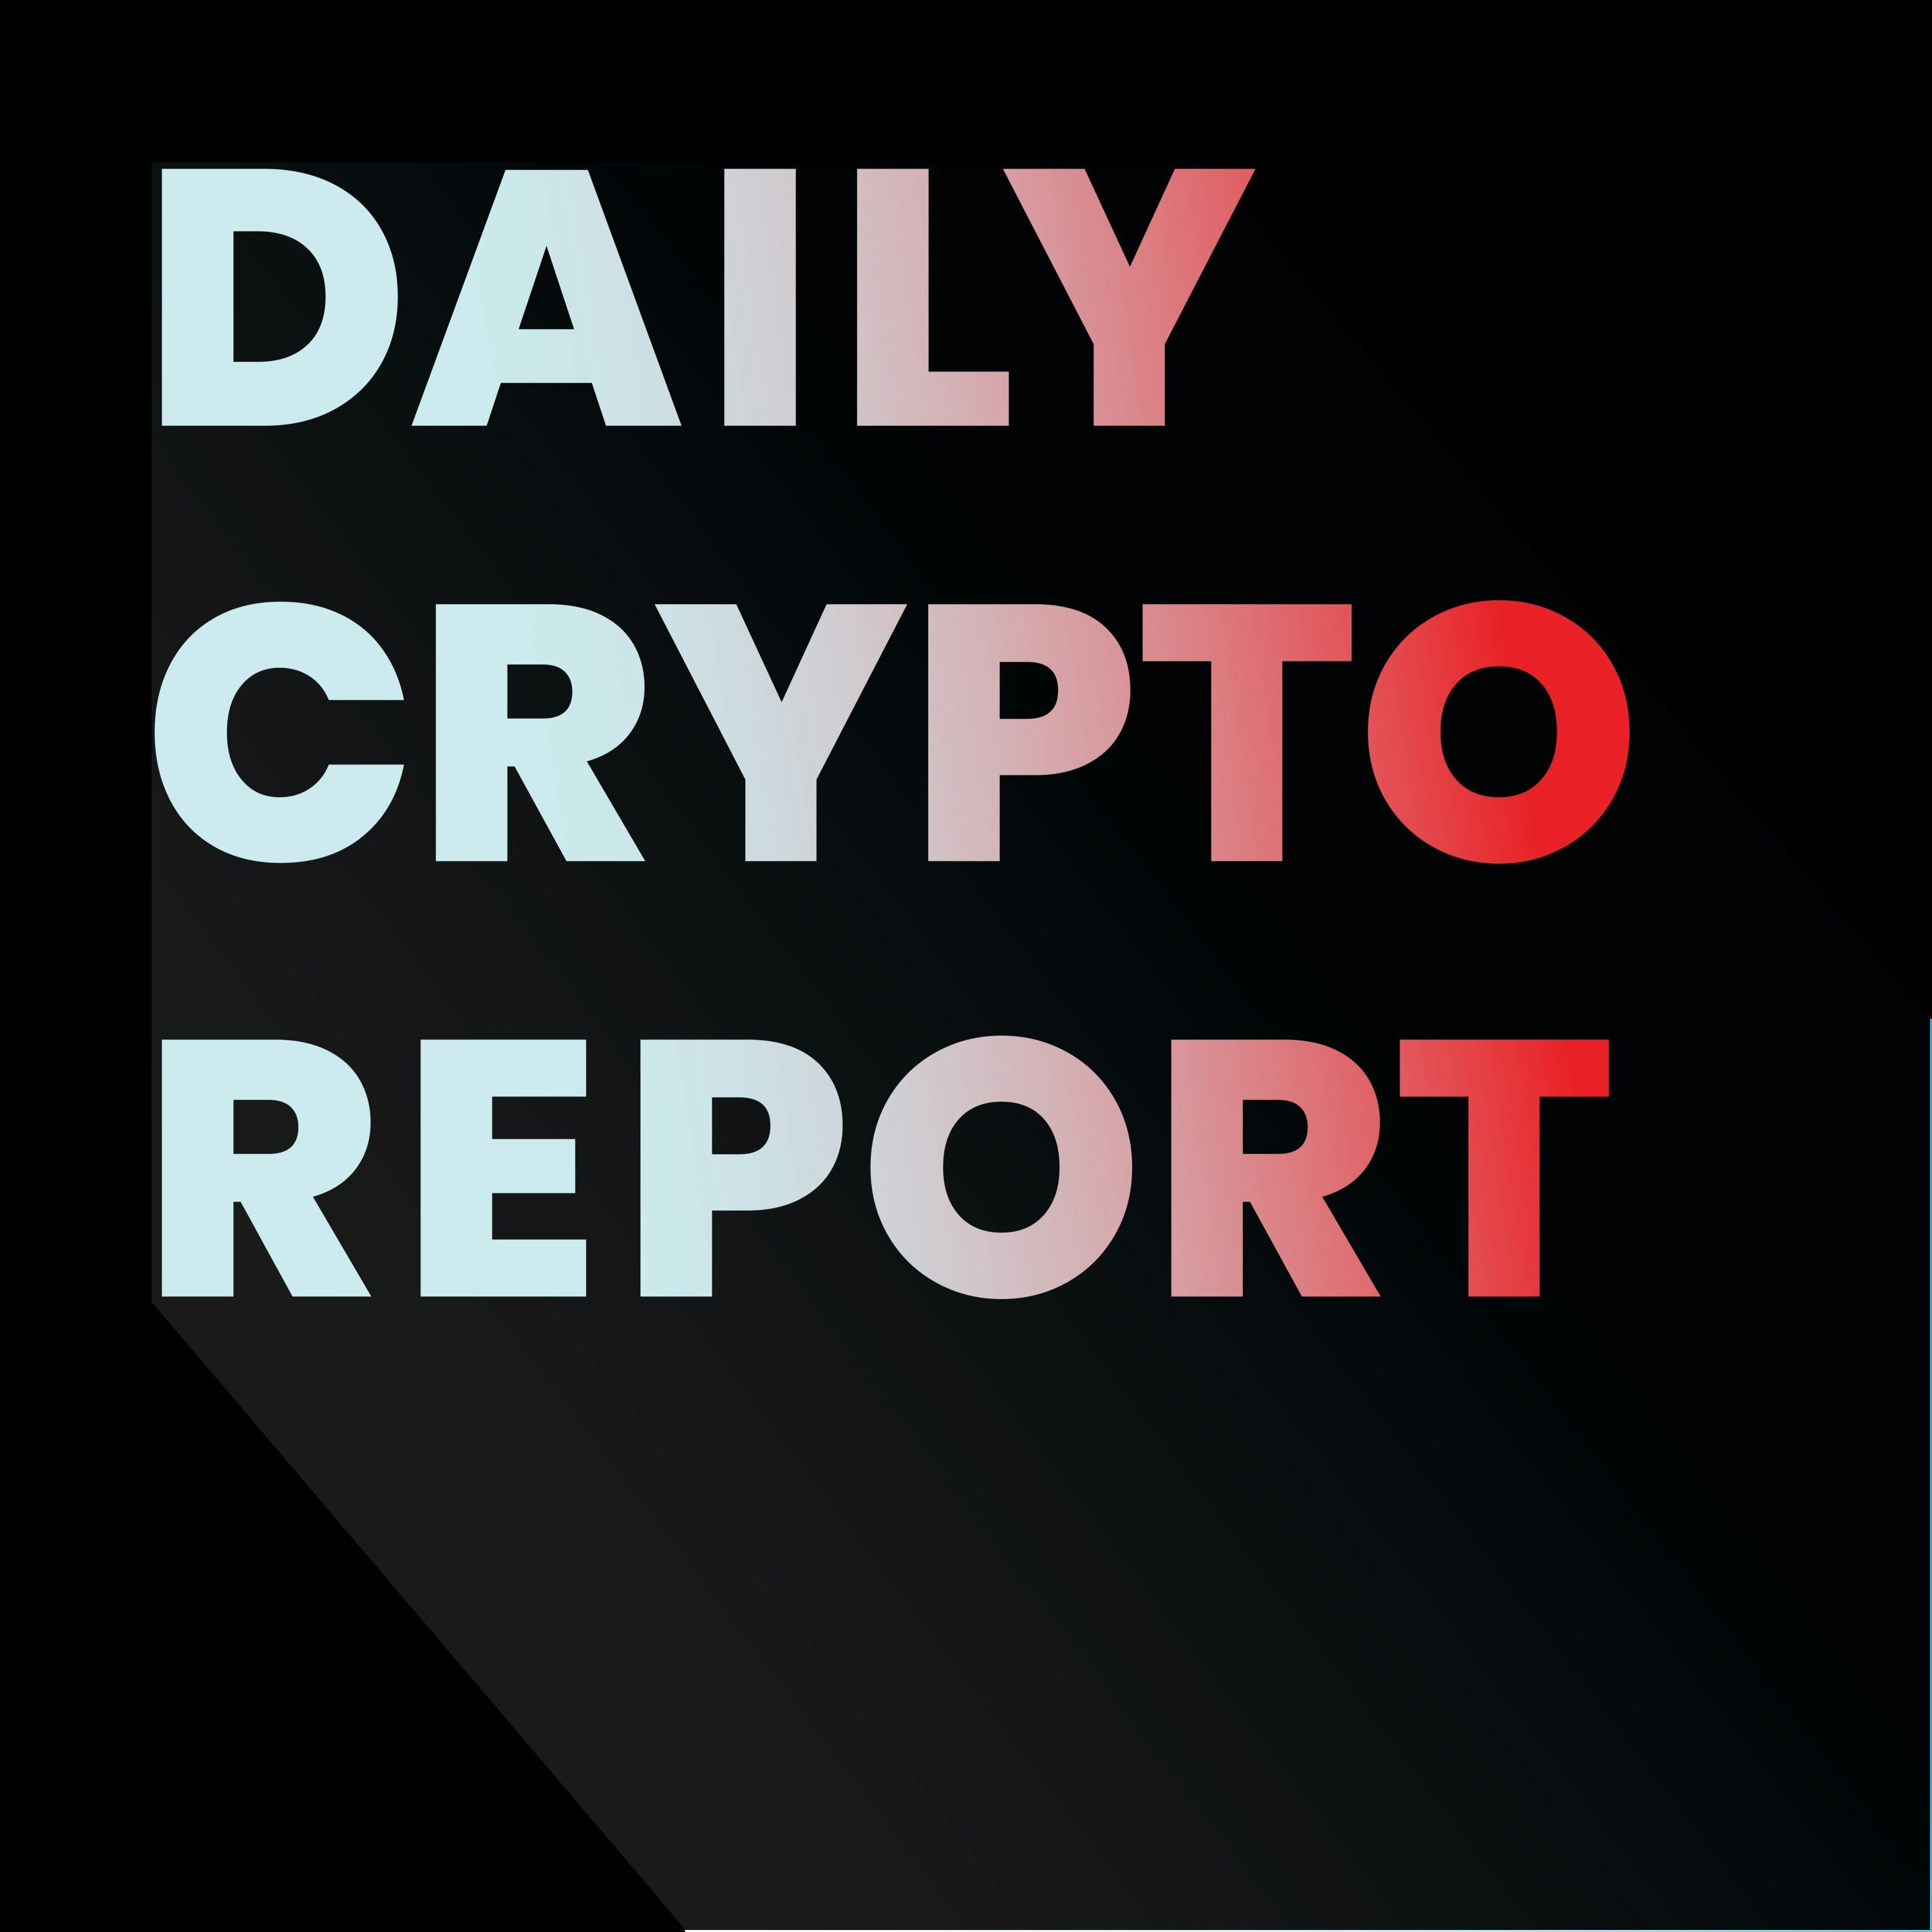 Daily Crypto Report cover image